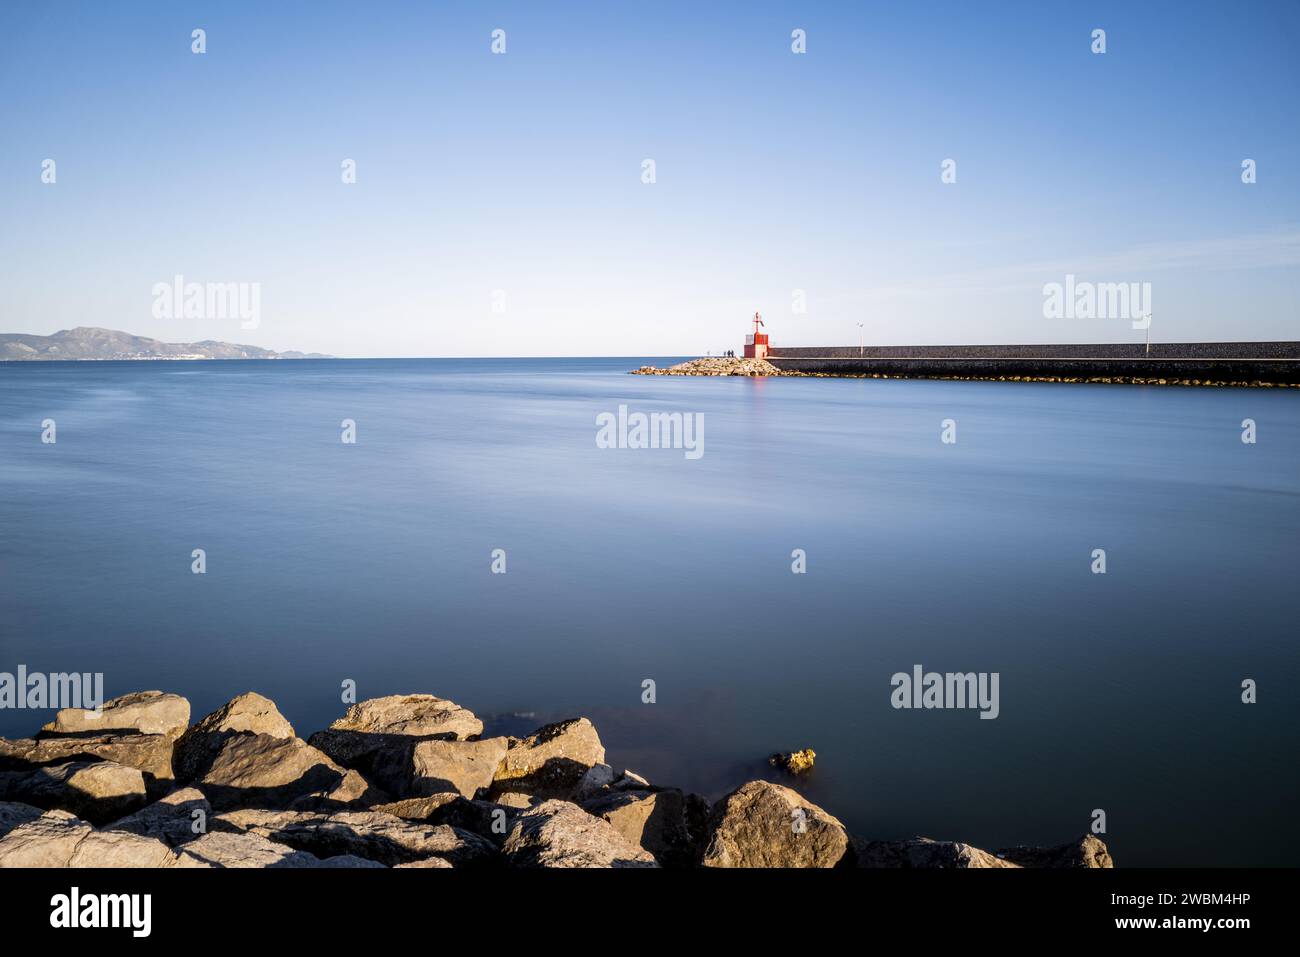 Far away red lighthouse, surrounded by rocks and a calm blue sea. Stock Photo